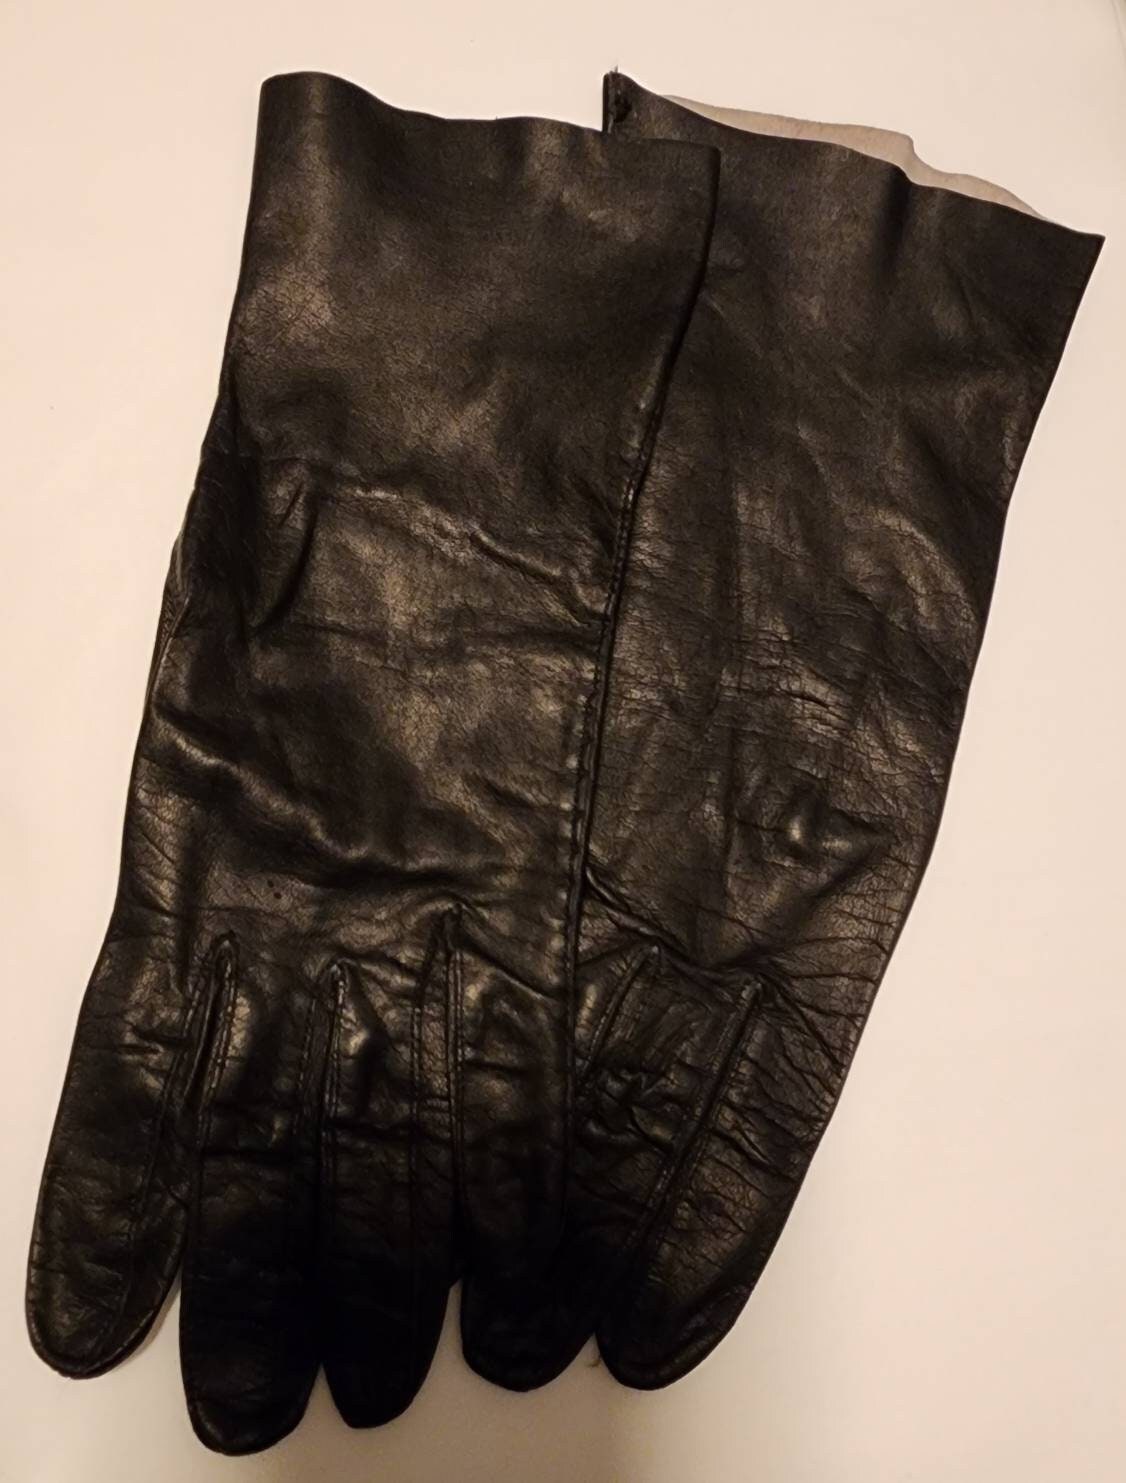 Vintage Leather Gloves 1950s Thin Black Leather Midlength Gloves Mid Century Rockabilly 7